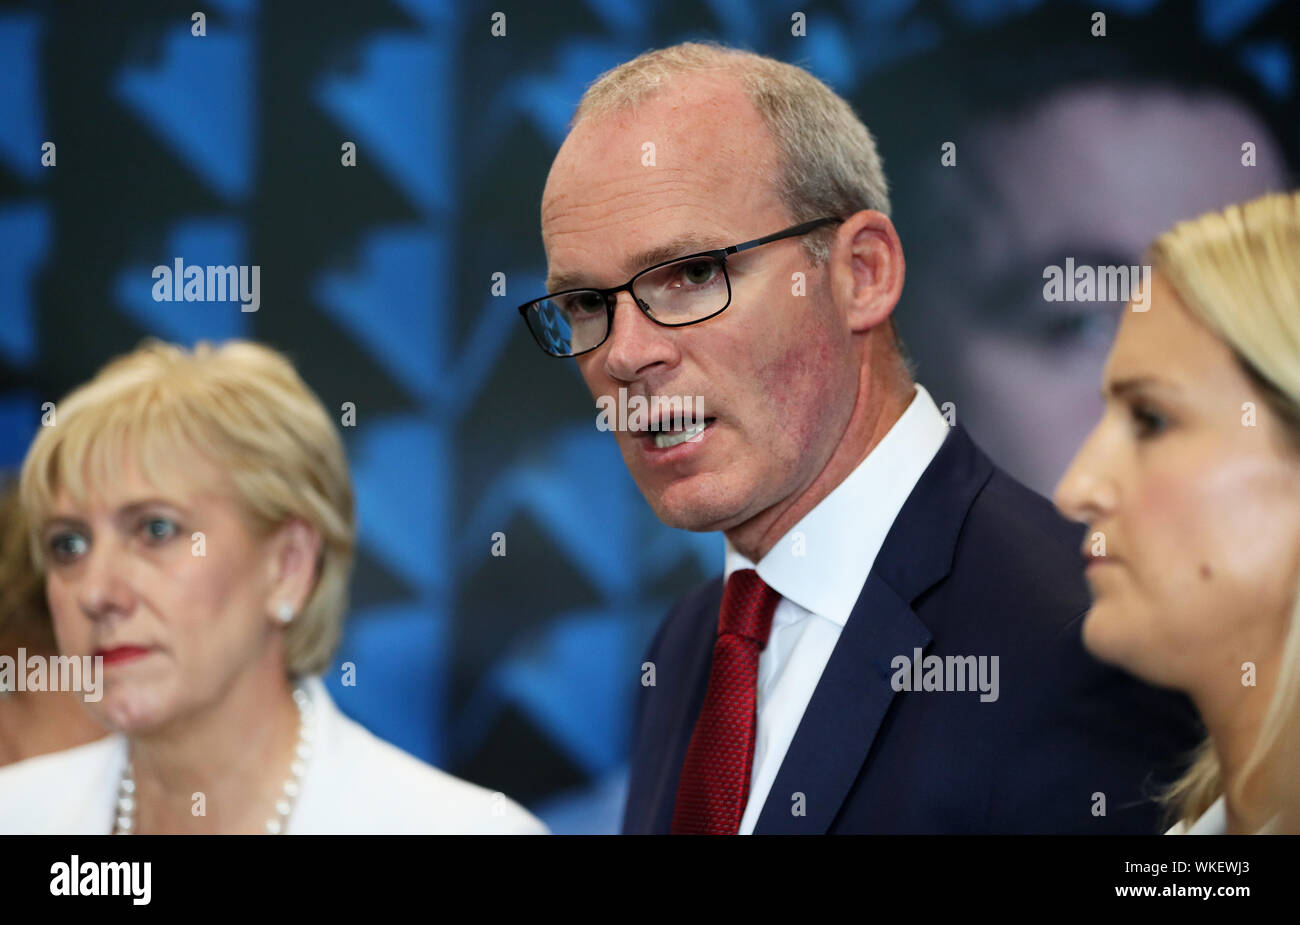 Minister for Foreign Affairs Simon Coveney speaking at the launch of the 'Getting Your Business Brexit Ready - Practical Steps' campaign during Enterprise Ireland's International Markets Week at the RDS in Dublin. Stock Photo